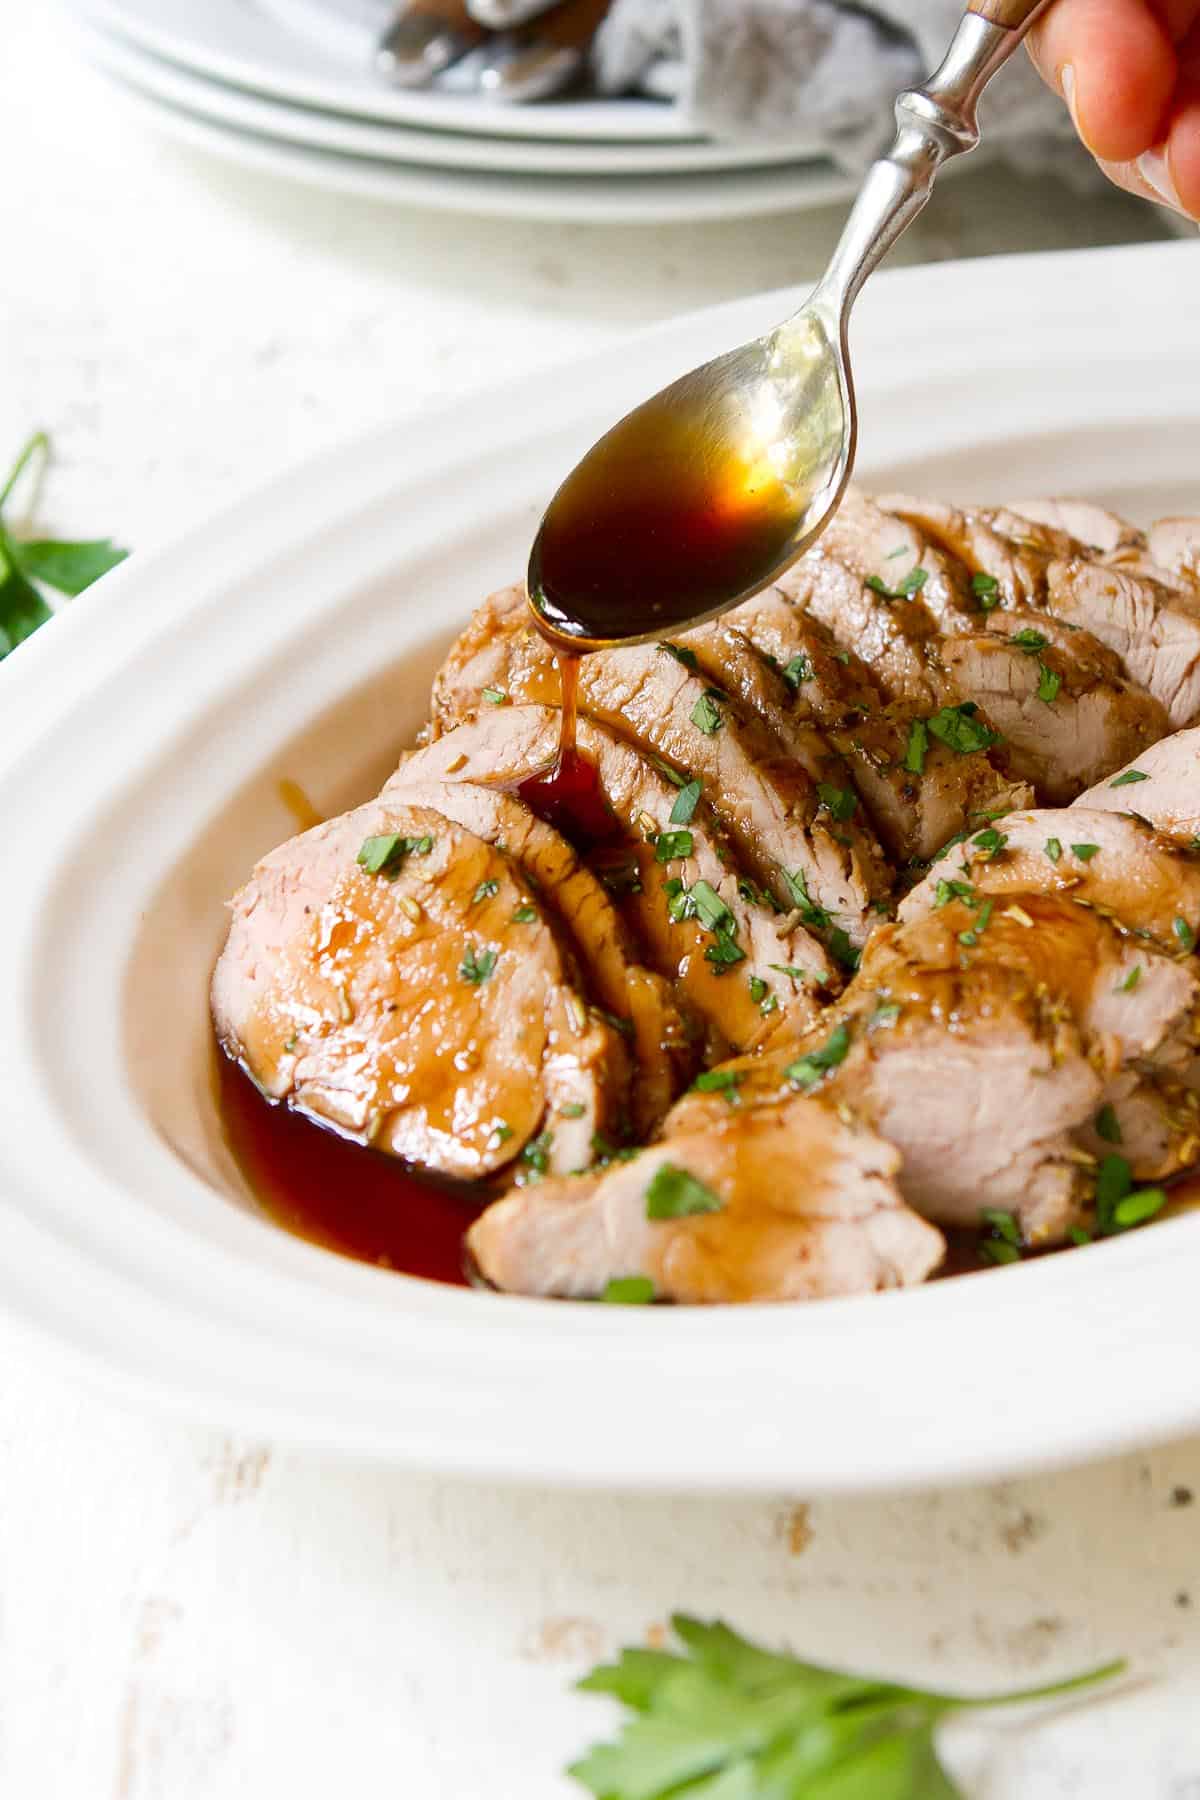 Oven roasted pork tenderloin gets all dressed up with an easy maple balsamic glaze. Lean, delicious, quick to make and impressive enough to serve to guests! | Recipes in oven | Sauce | Balsamic vinegar